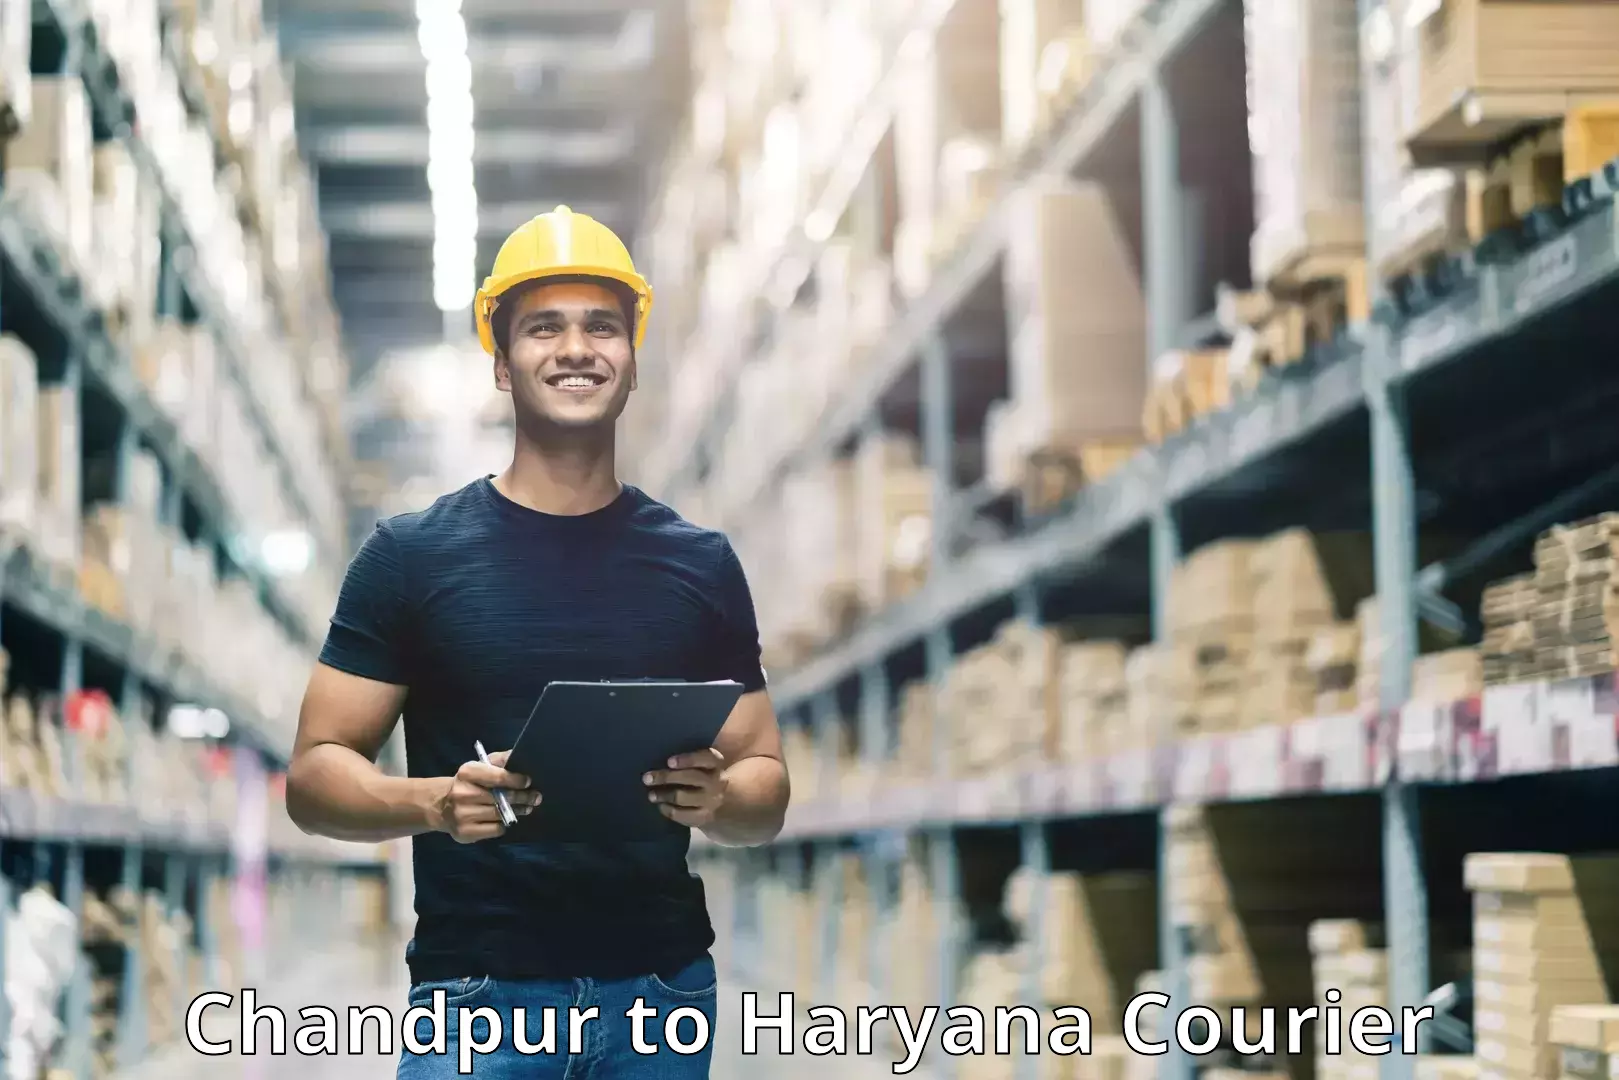 Easy access courier services Chandpur to NCR Haryana